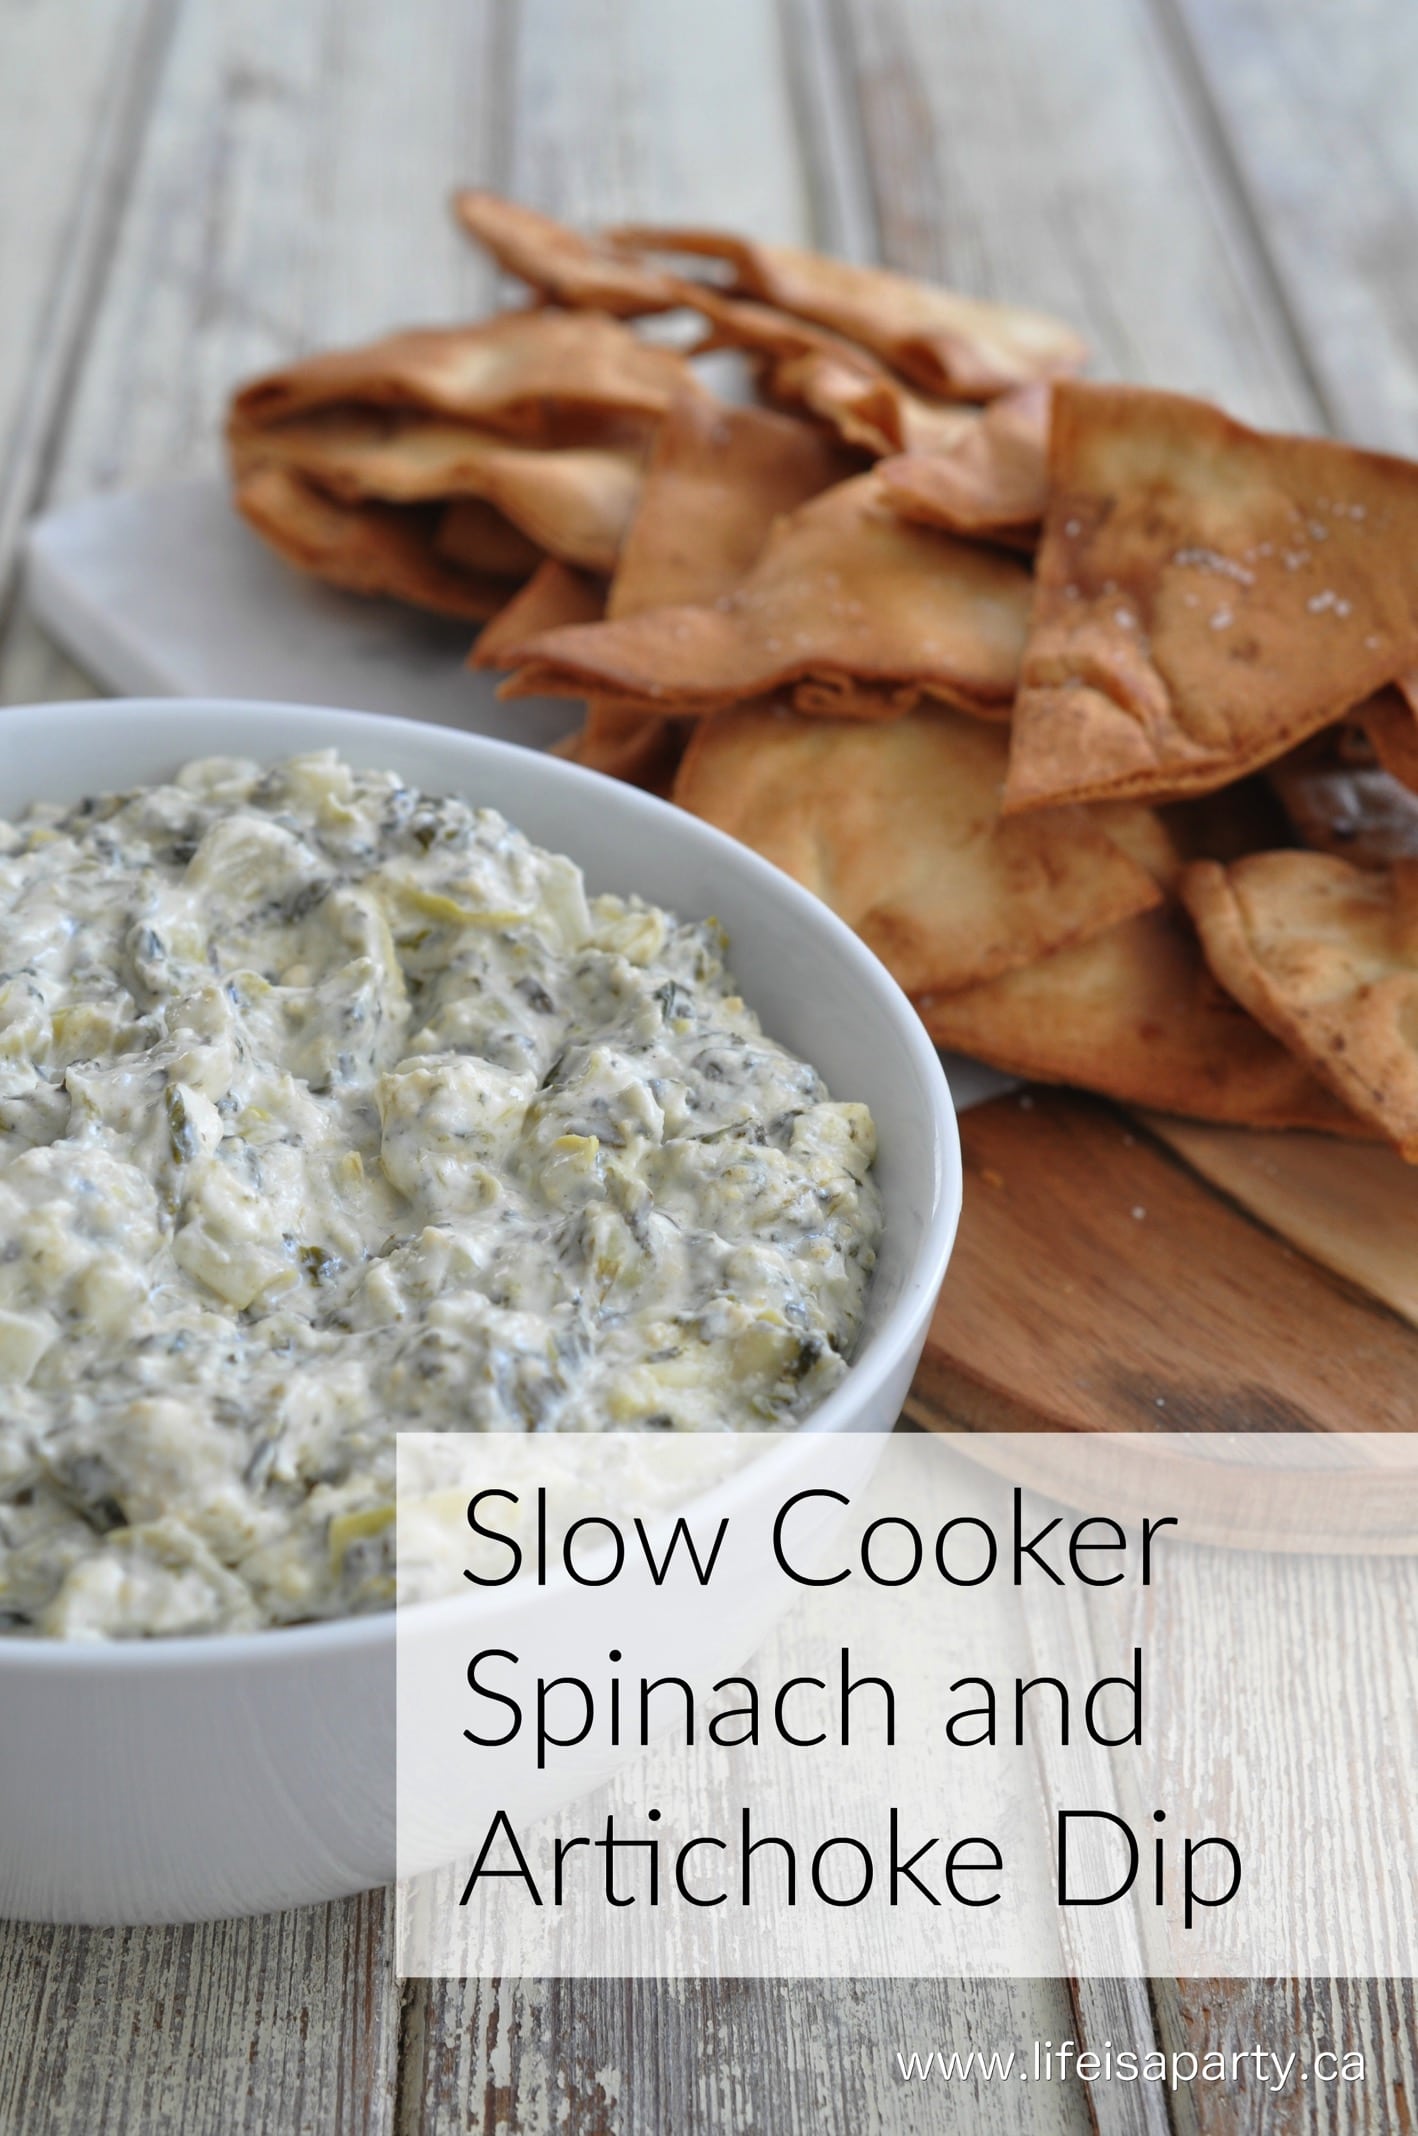 Slow Cooker Spinach and Artichoke Dip: Perfect for easy entertaining, just add everything to the slow cooker and forget about it!